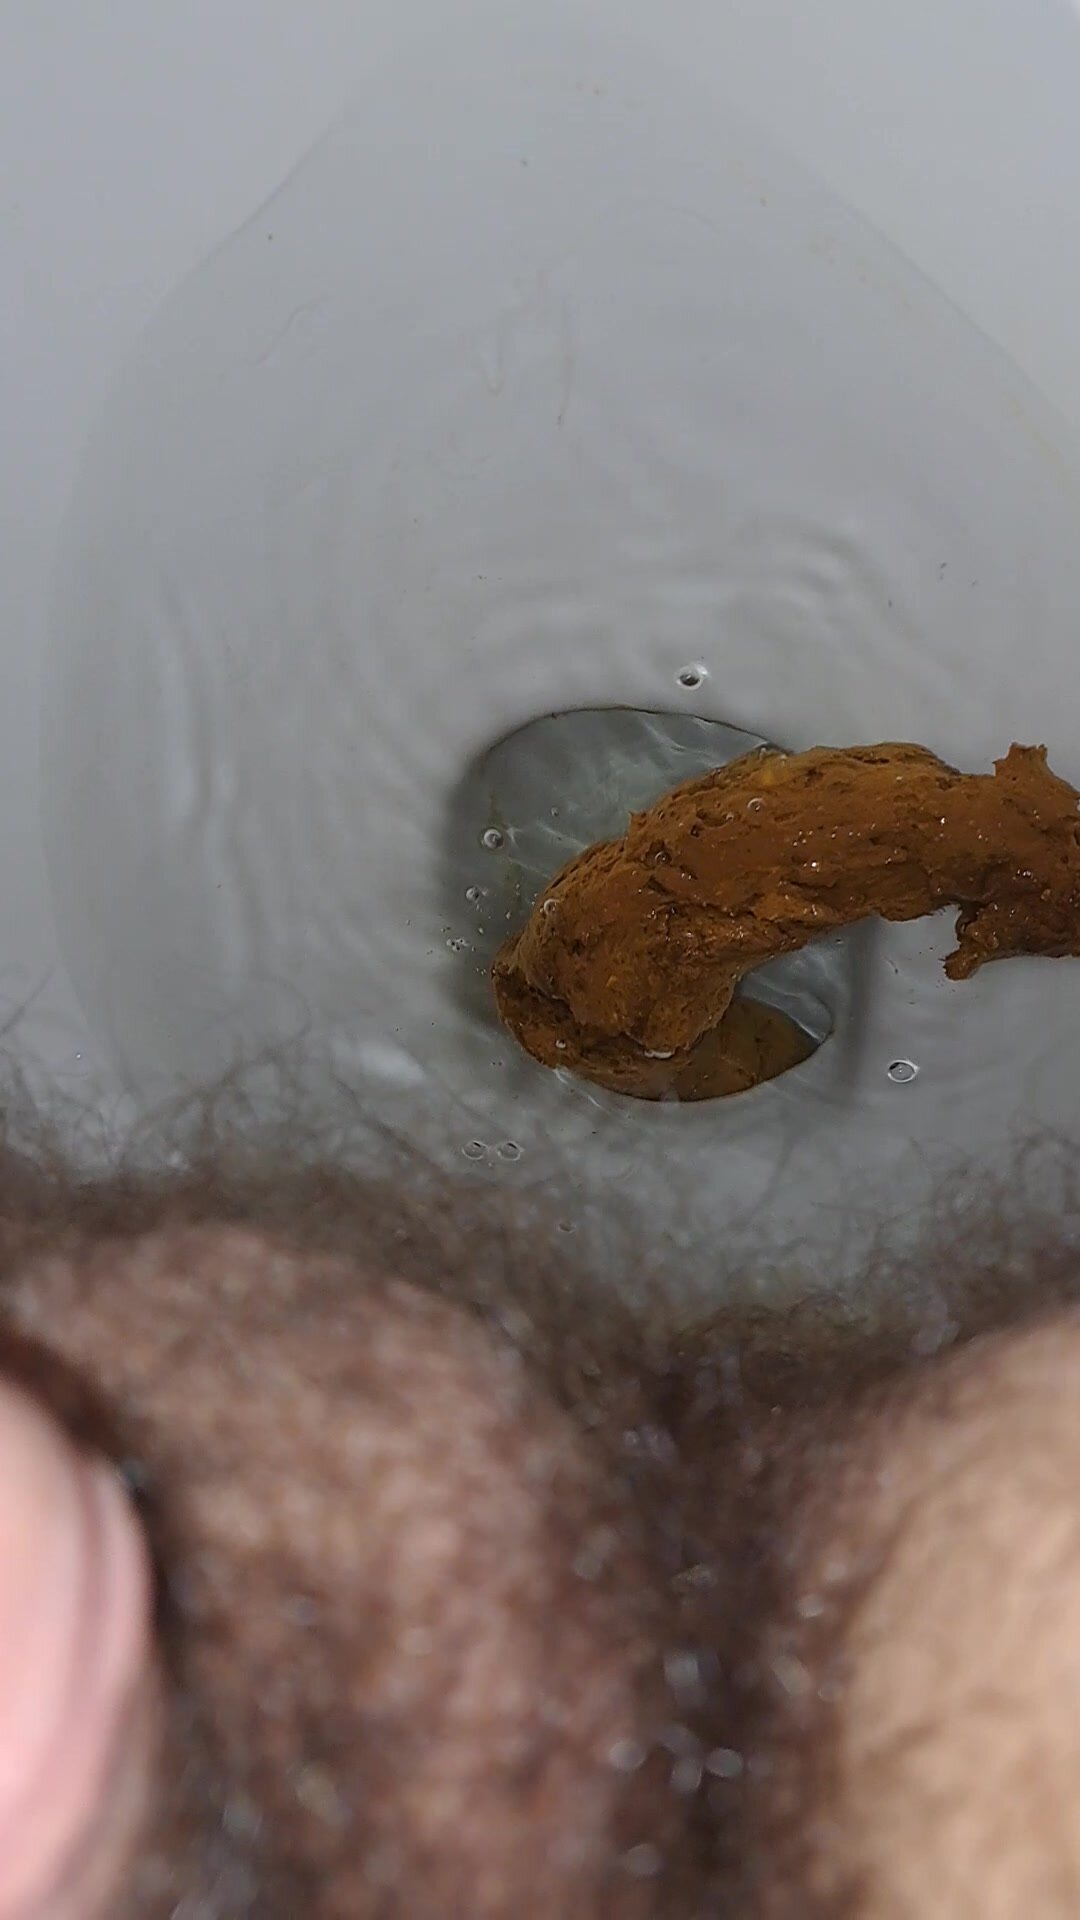 Solid poop with corn